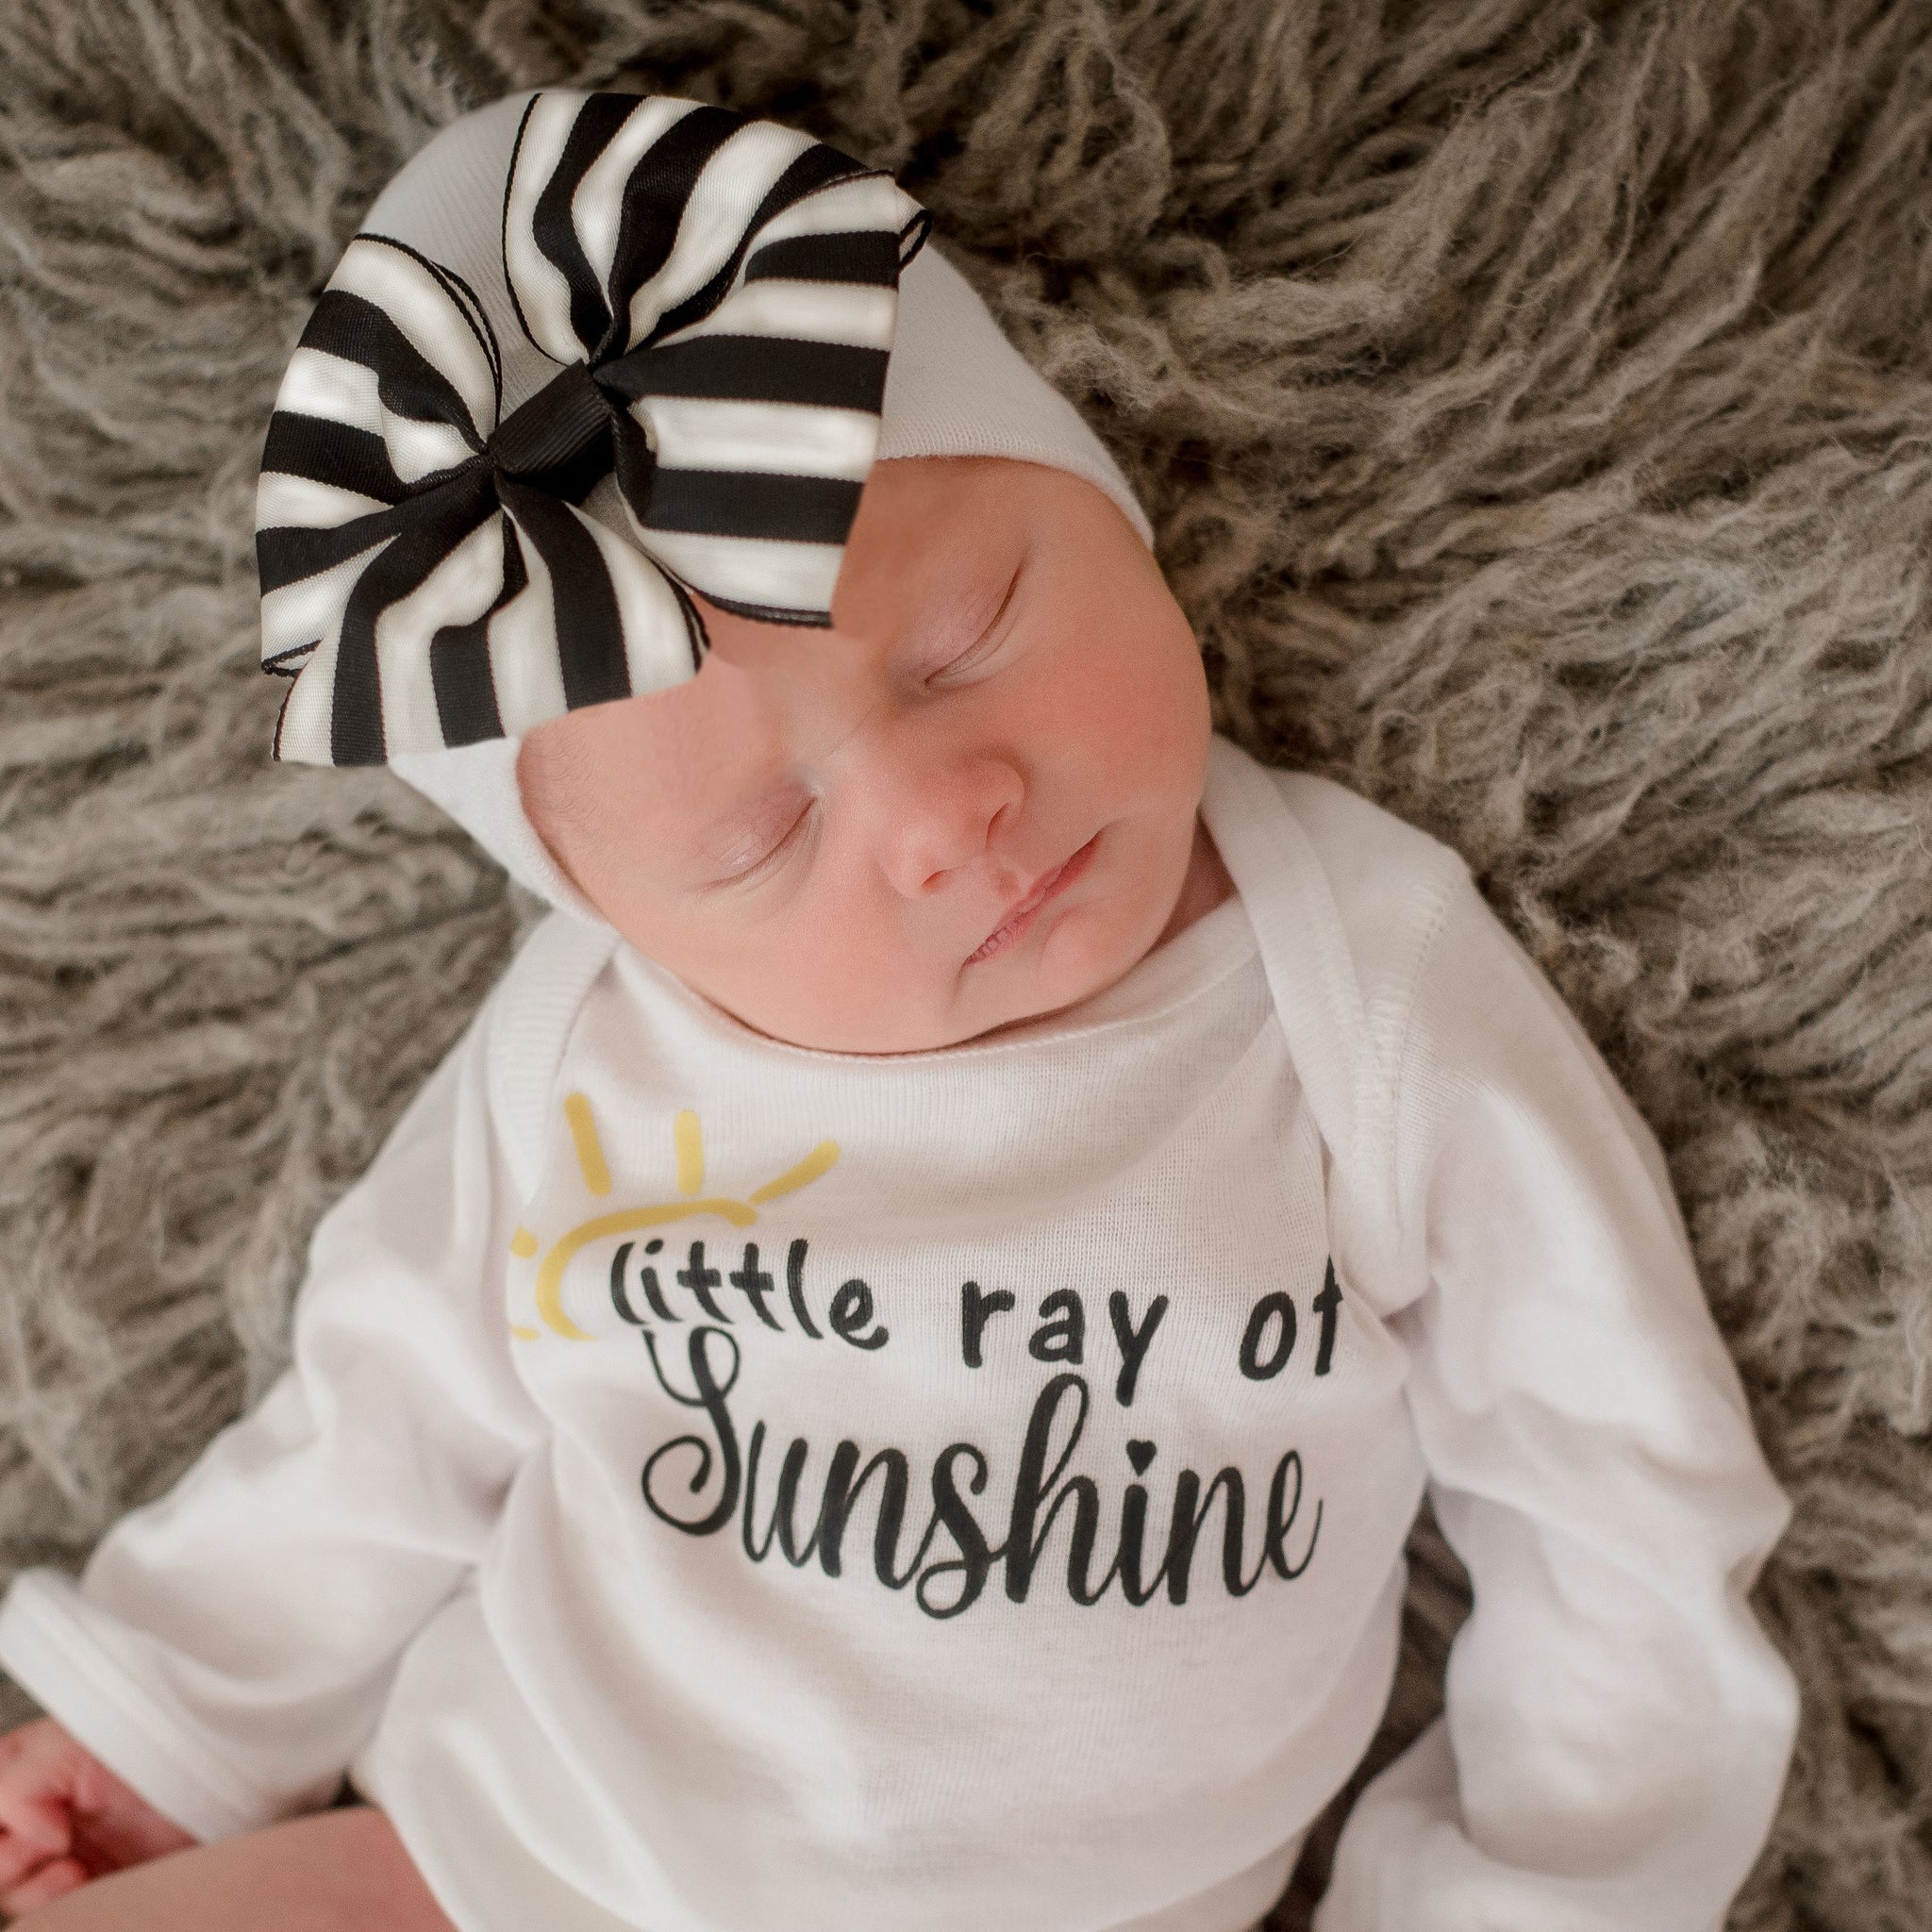 Melondipity Little Ray of Sunshine Newborn Girl Welcome Home Outfit - Newborn Girl Coming Home Outfit - Cabana Striped Bow with Onesie SET